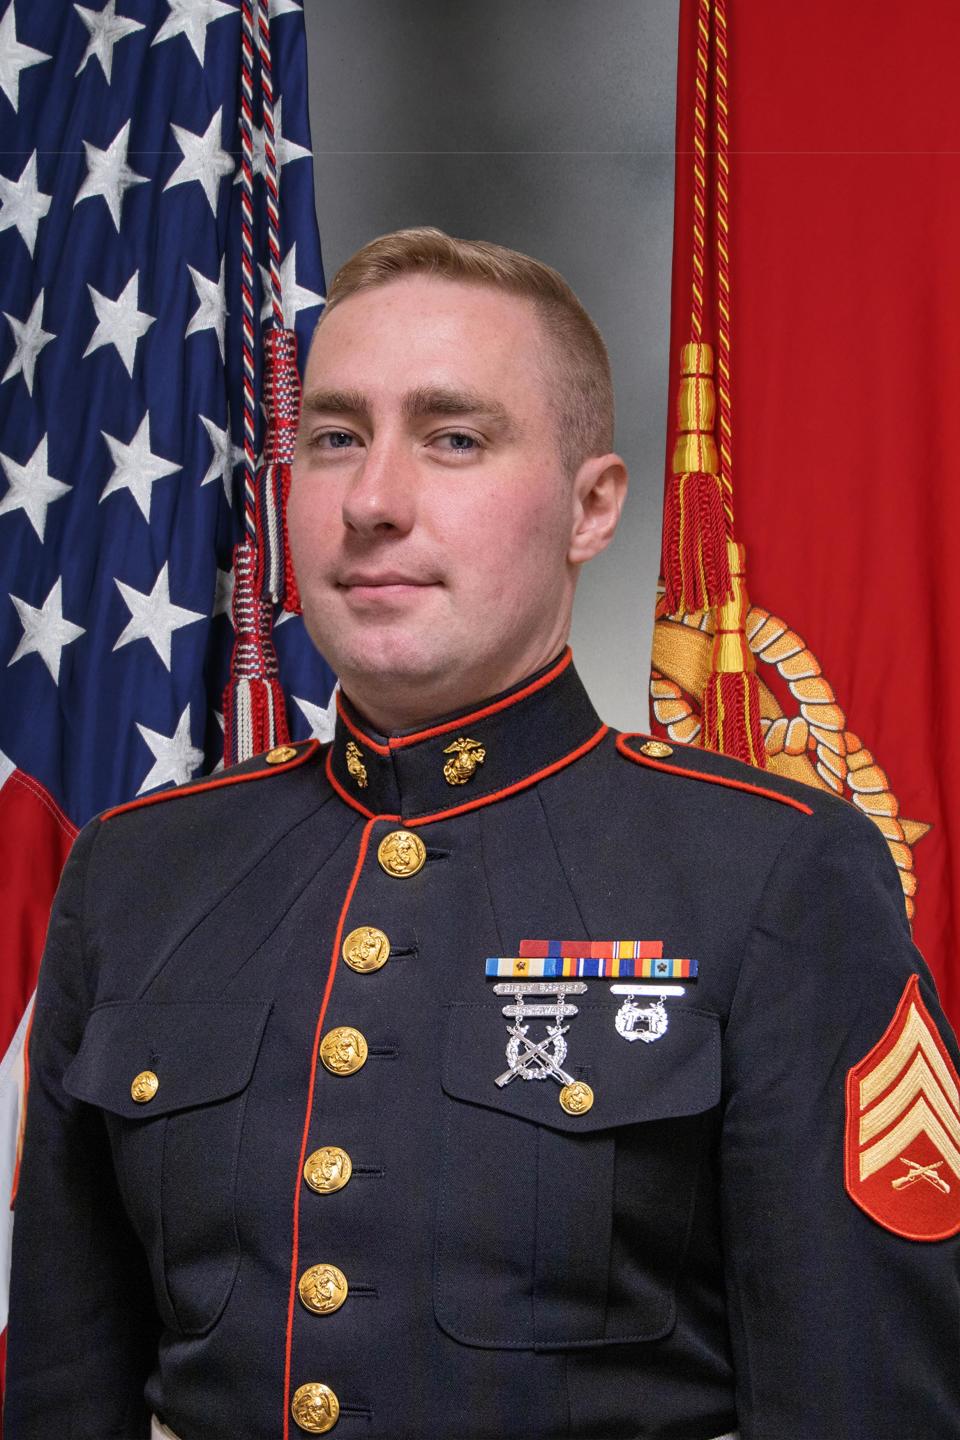 U.S. Marine Corps Sgt. Matthew P. Partyka died of suicide in July 2022 while on leave in North Carolina.